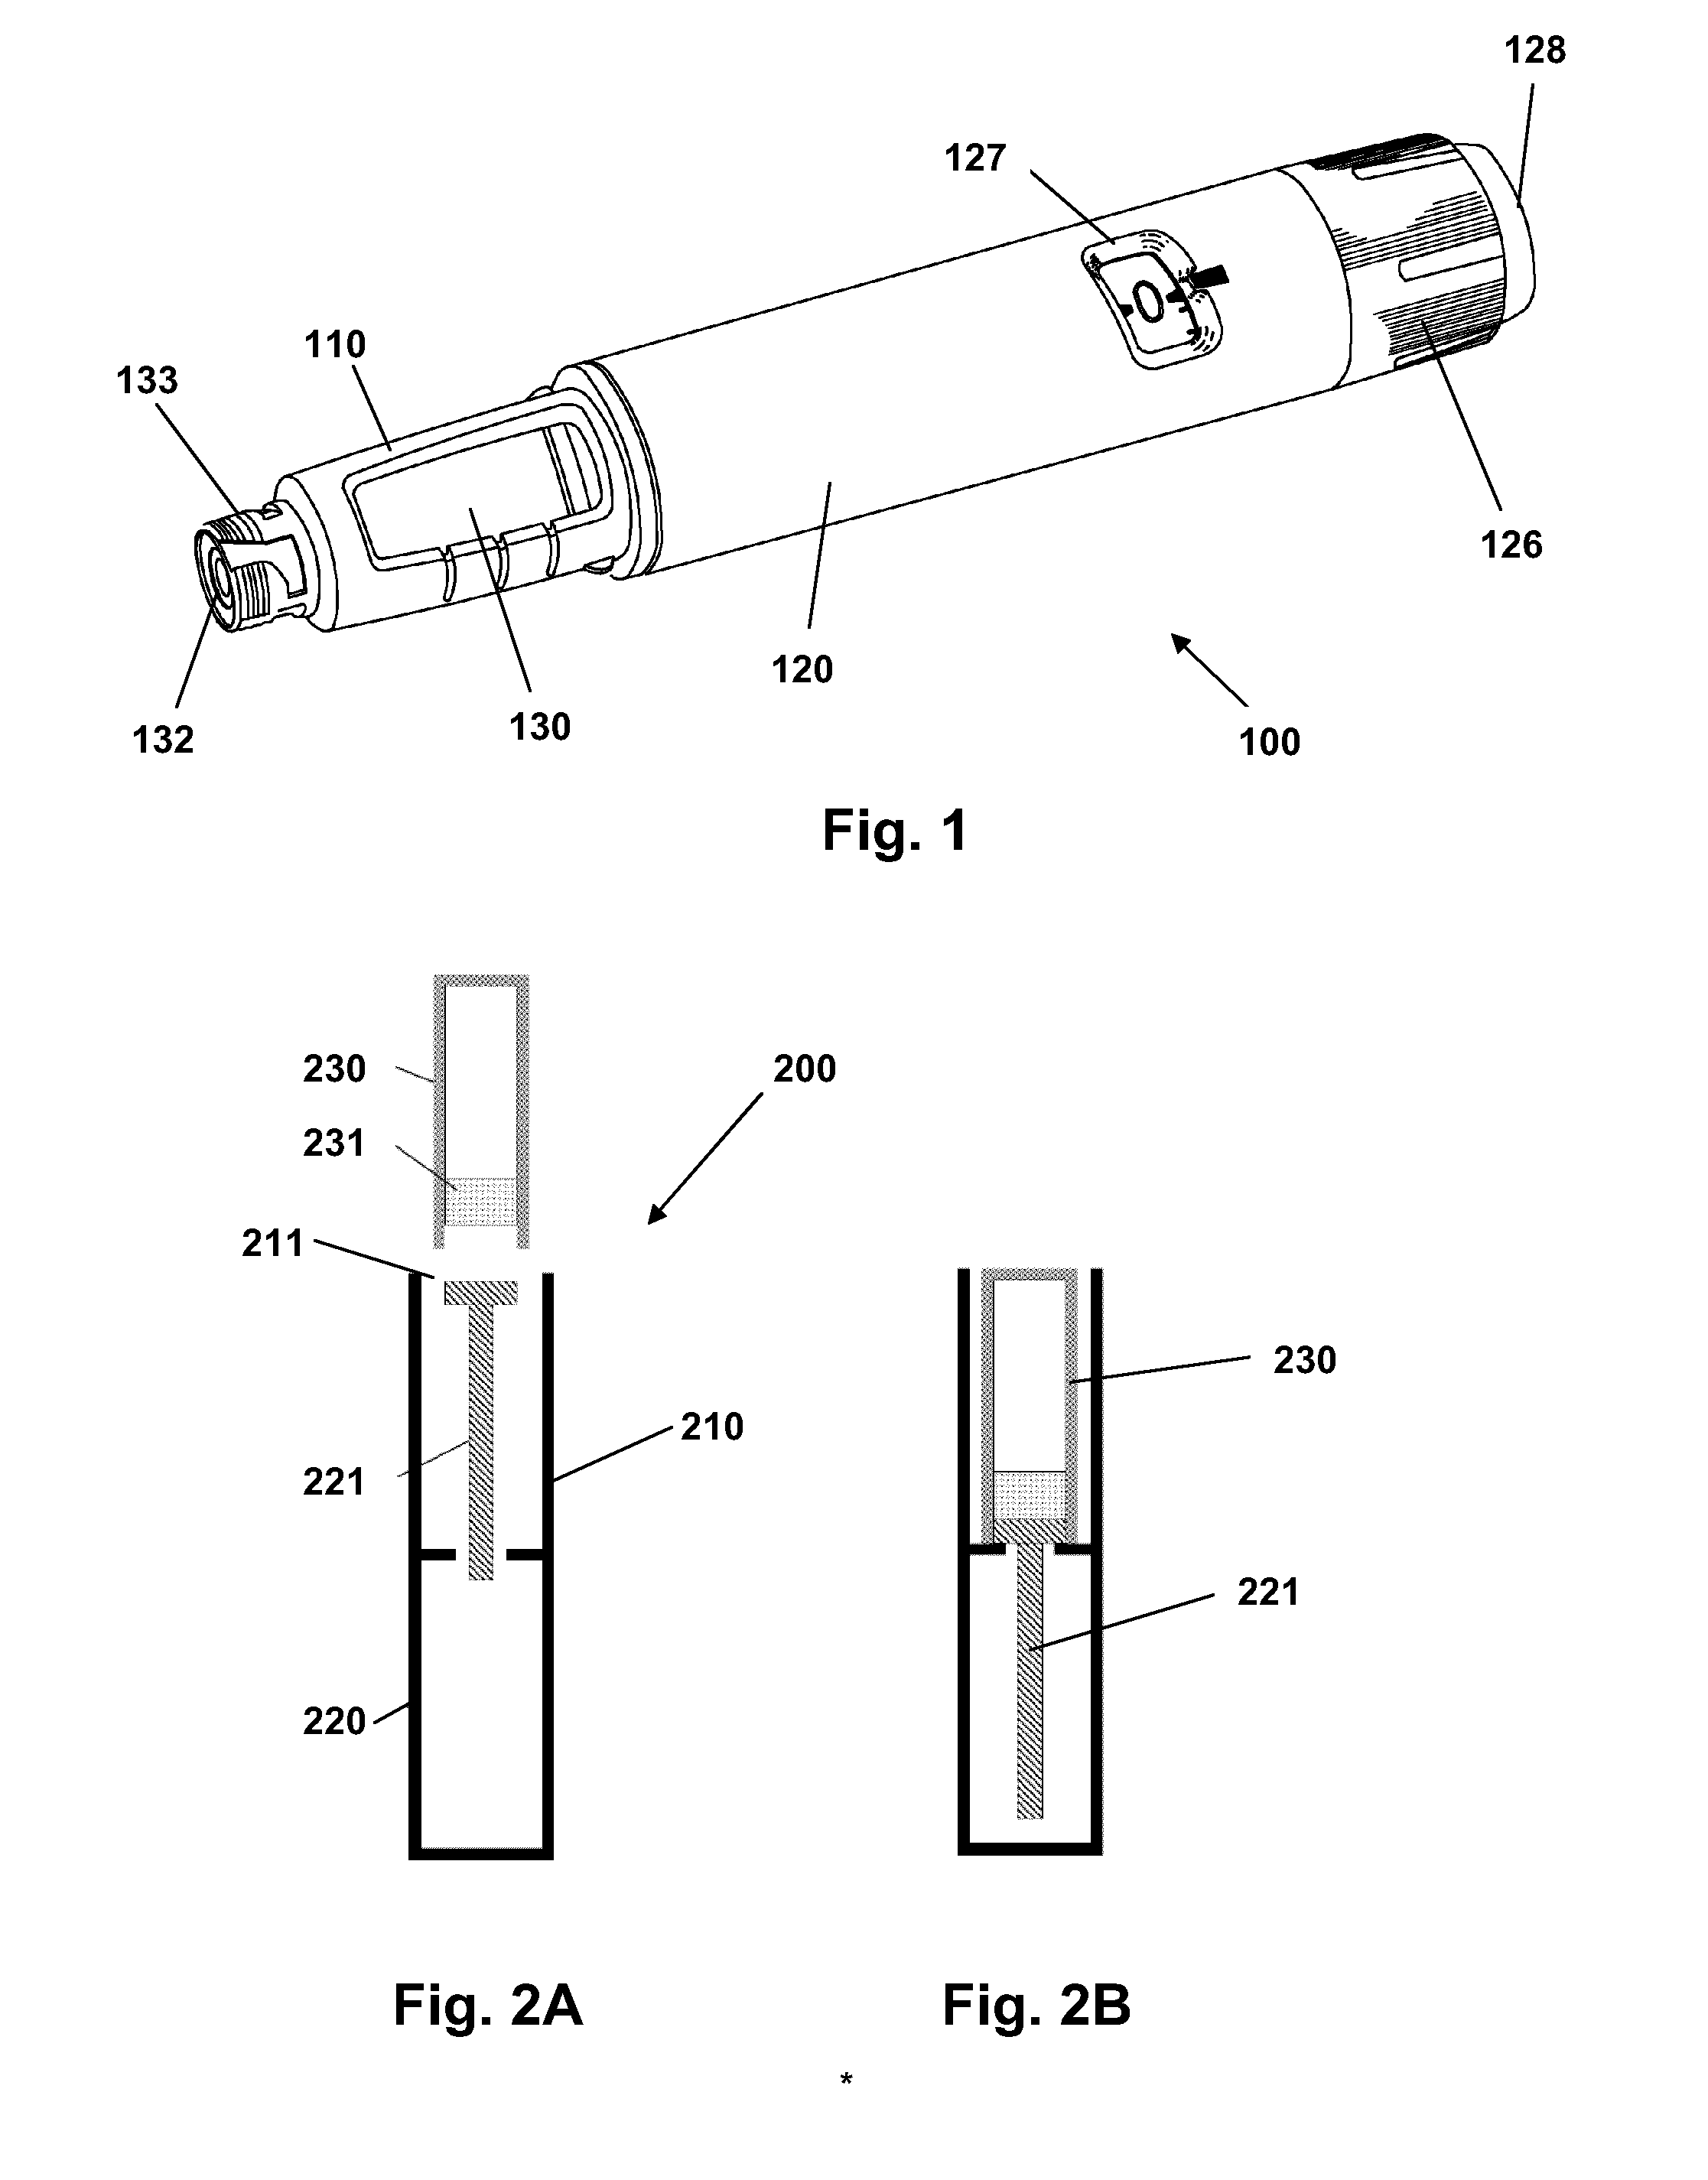 Drug Delivery Device with Cartridge Fixation Feature